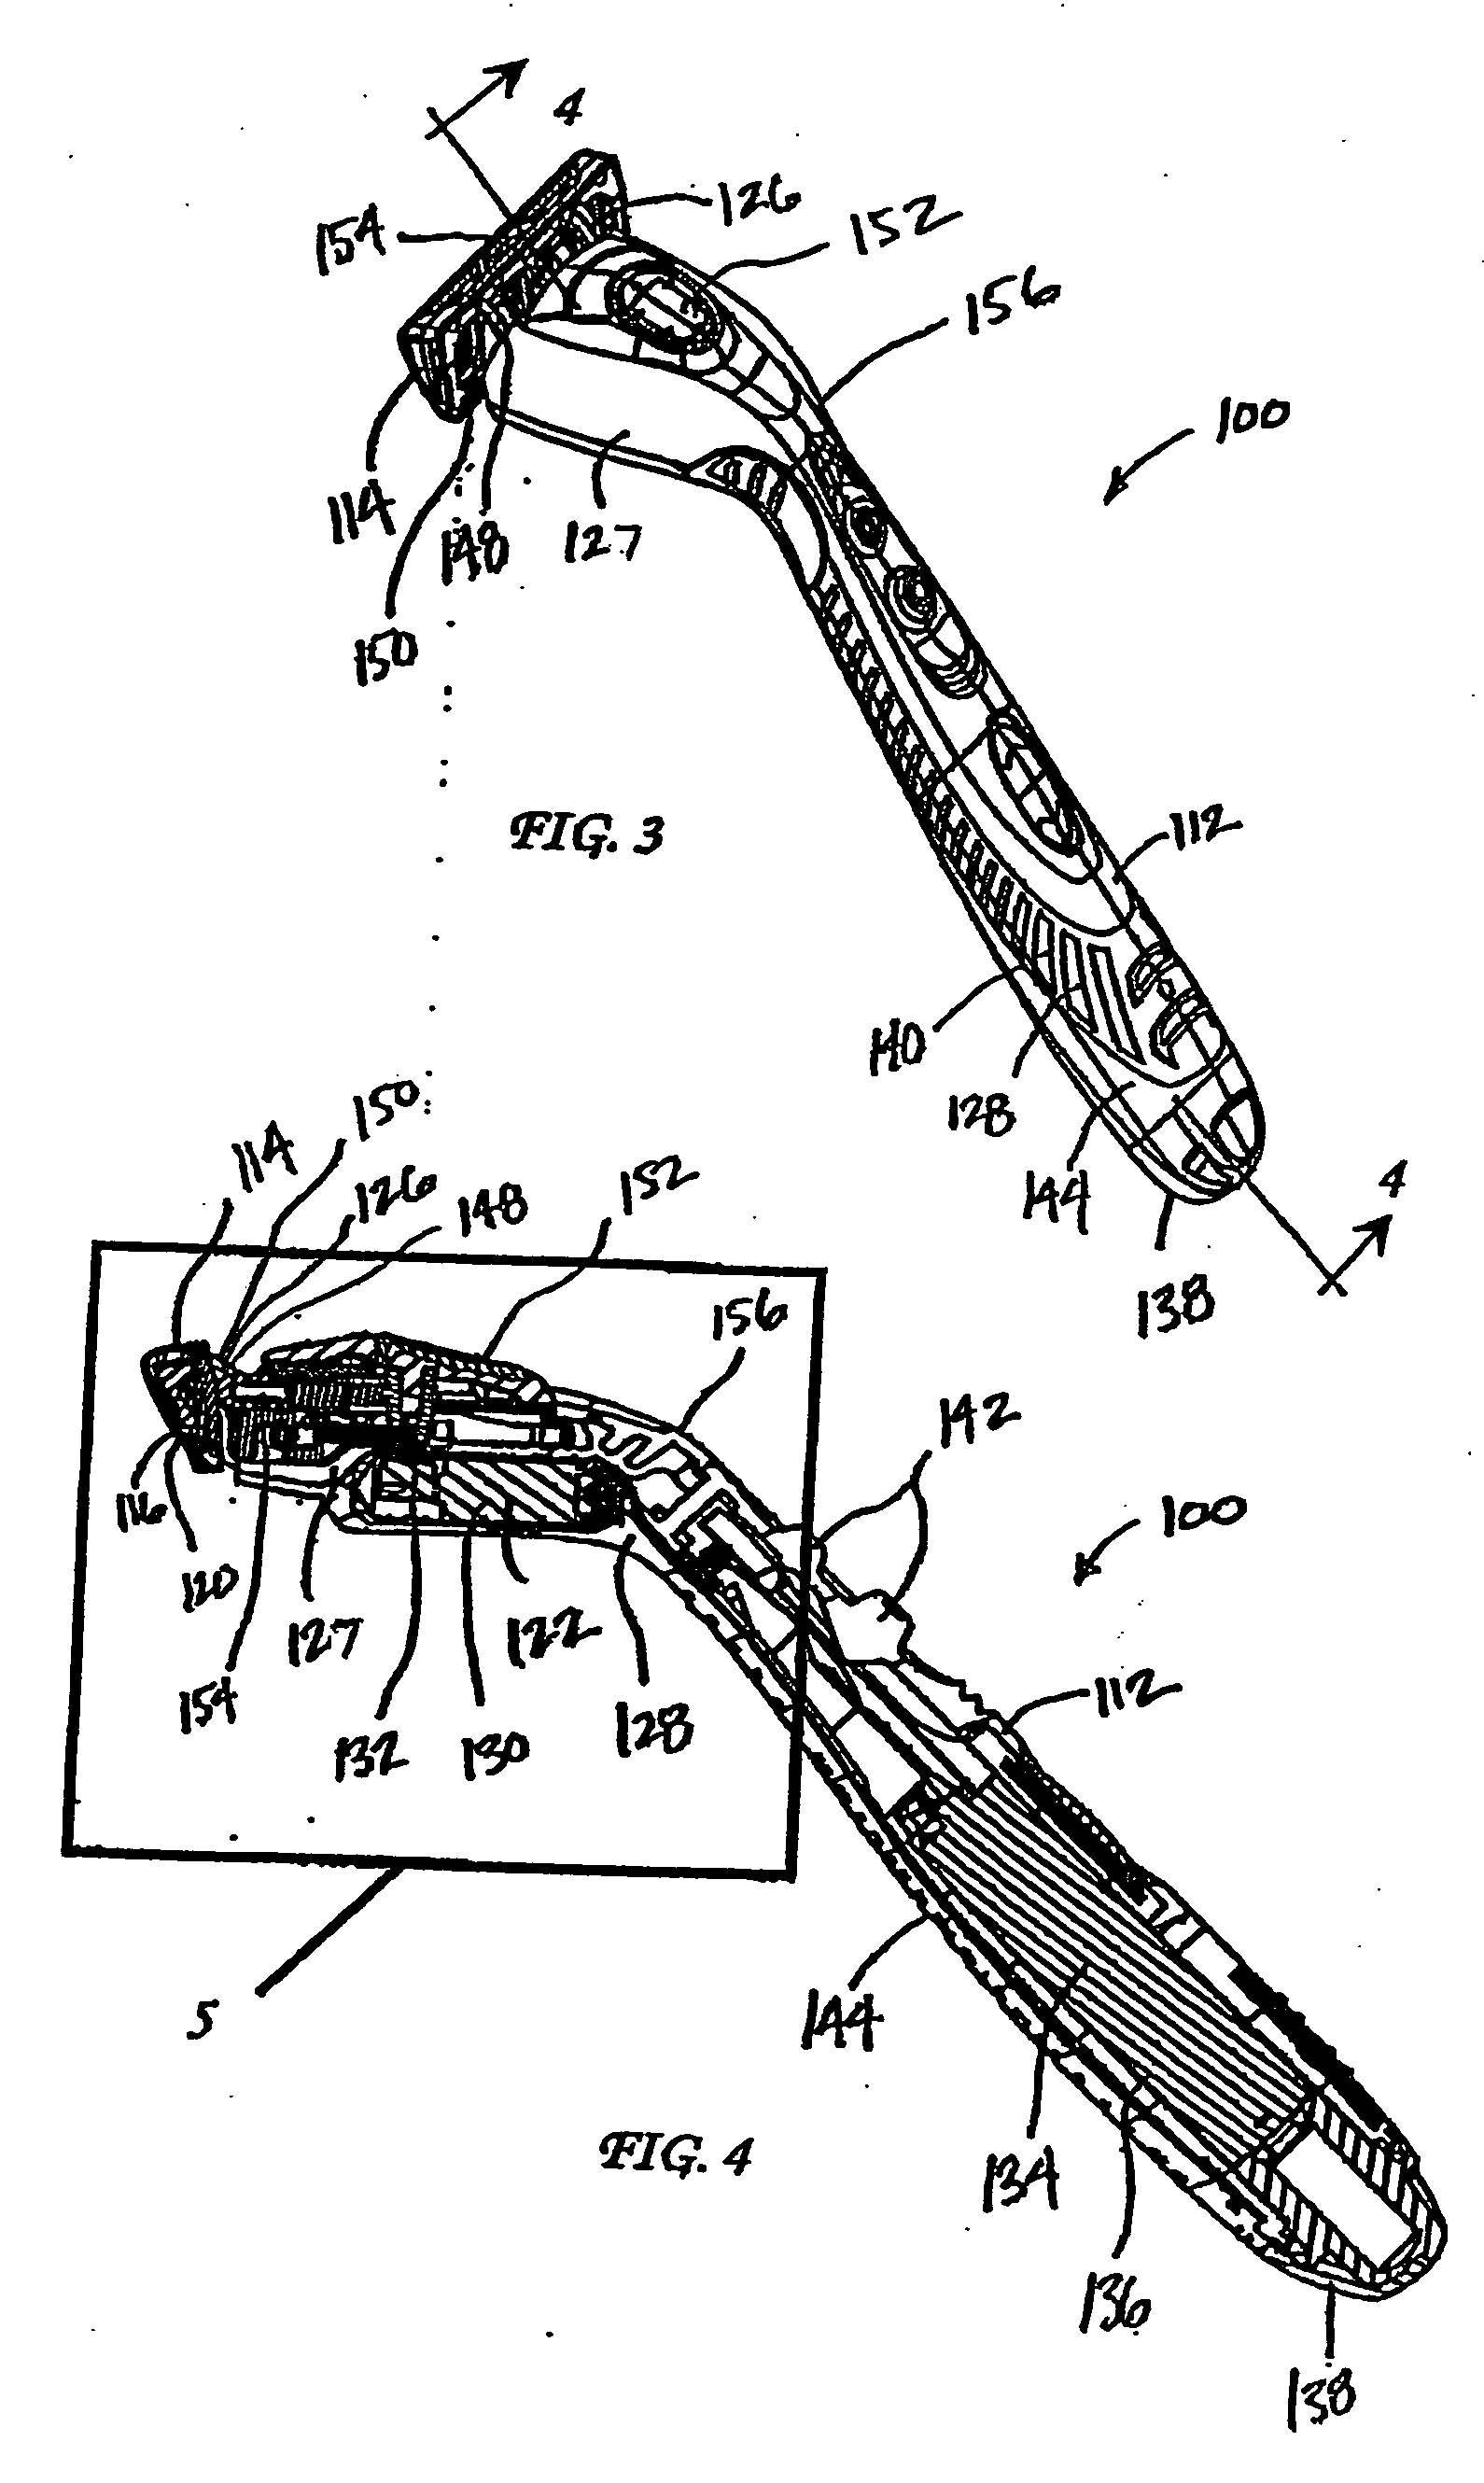 Shaving implement having a moving blade